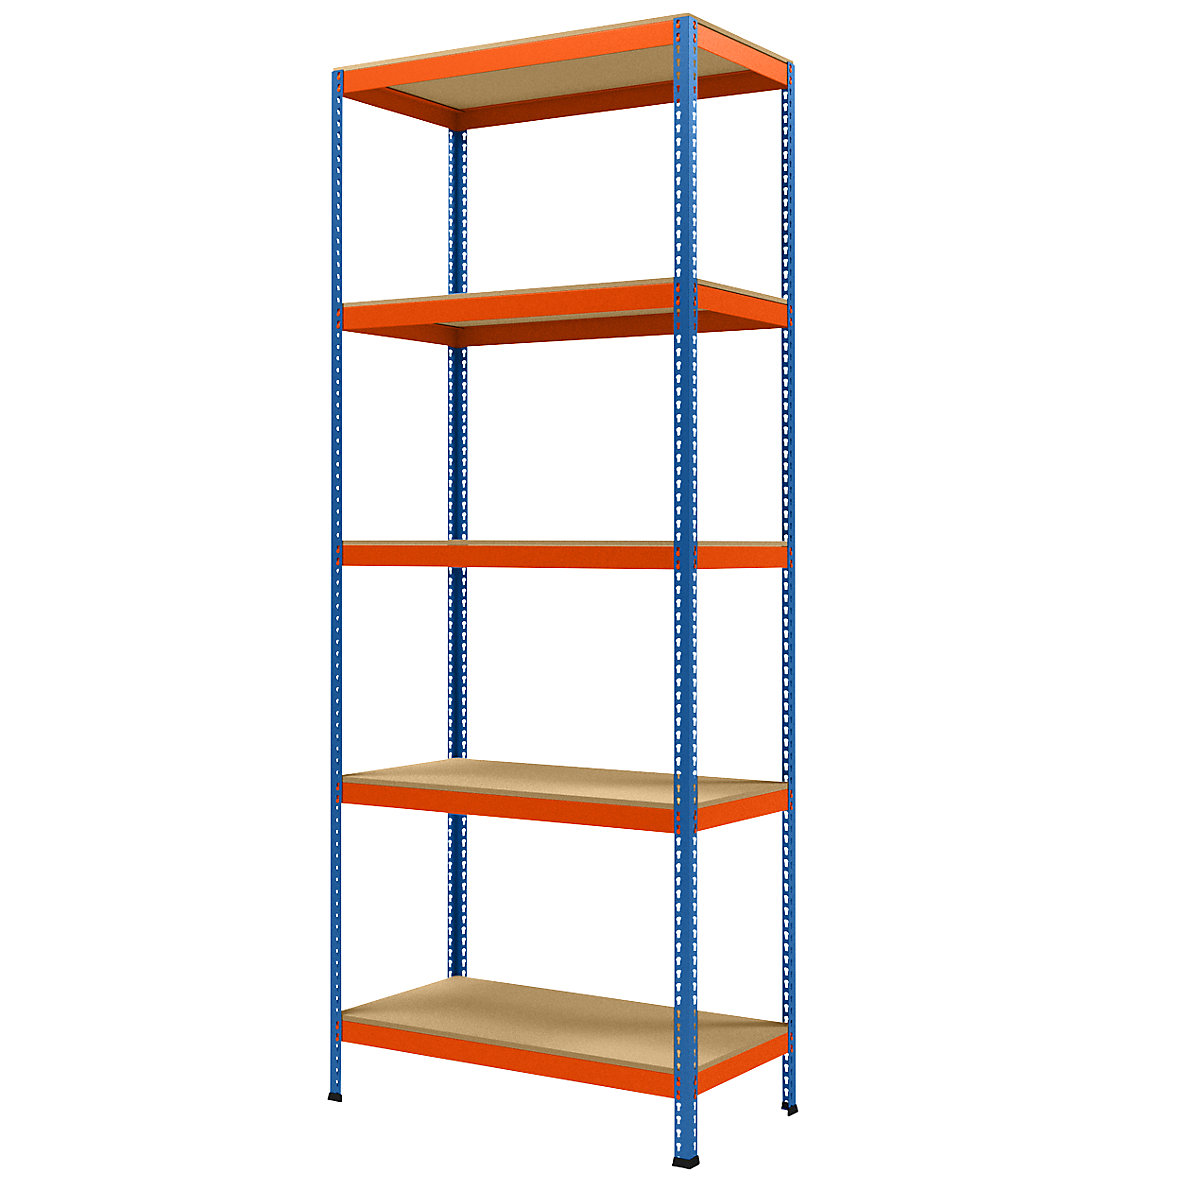 Wide span heavy duty shelving, height 3048 mm, overall depth 621 mm, width 1231 mm